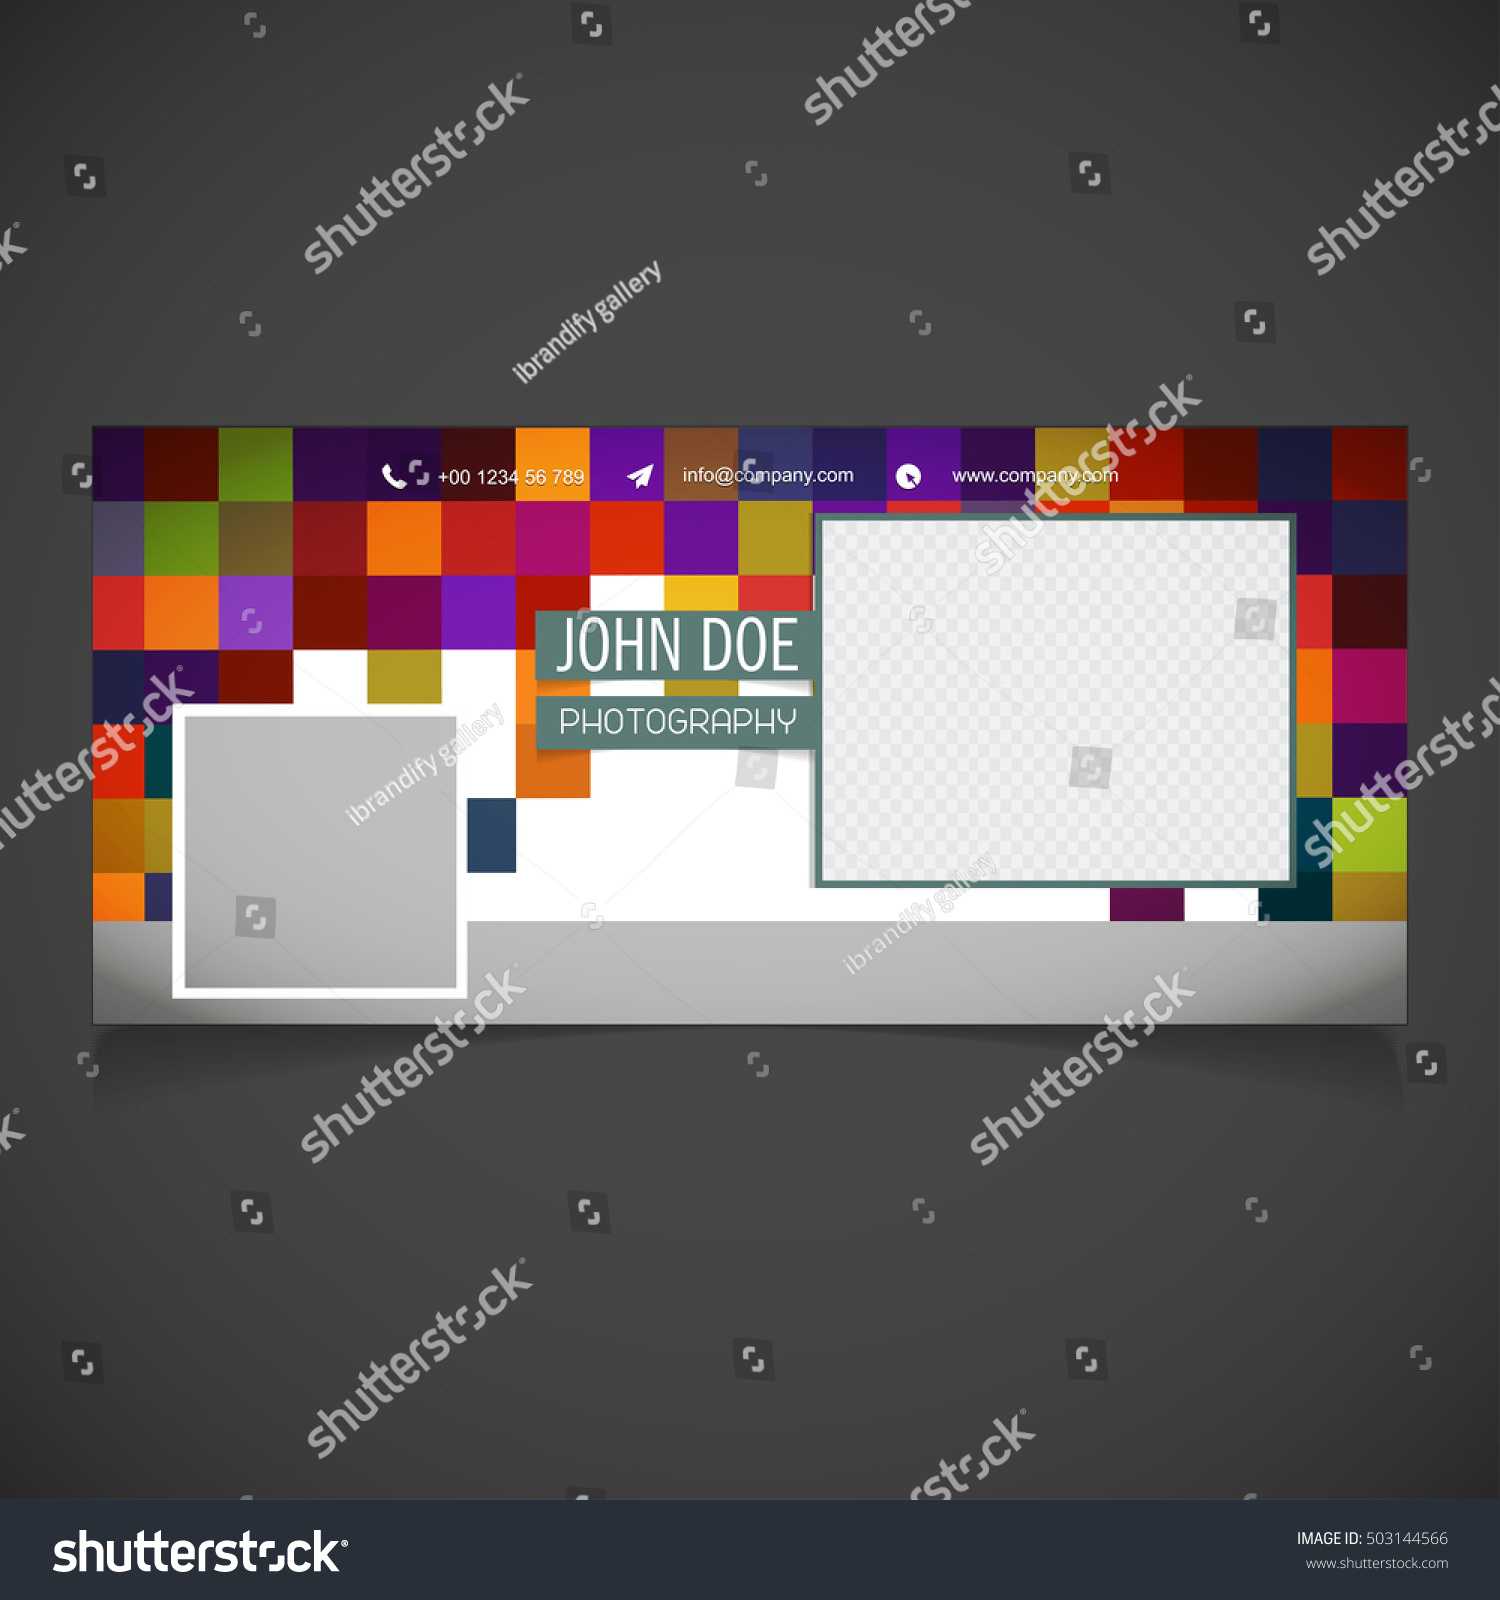 Creative Photography Banner Template Place Image Stock With Photography Banner Template